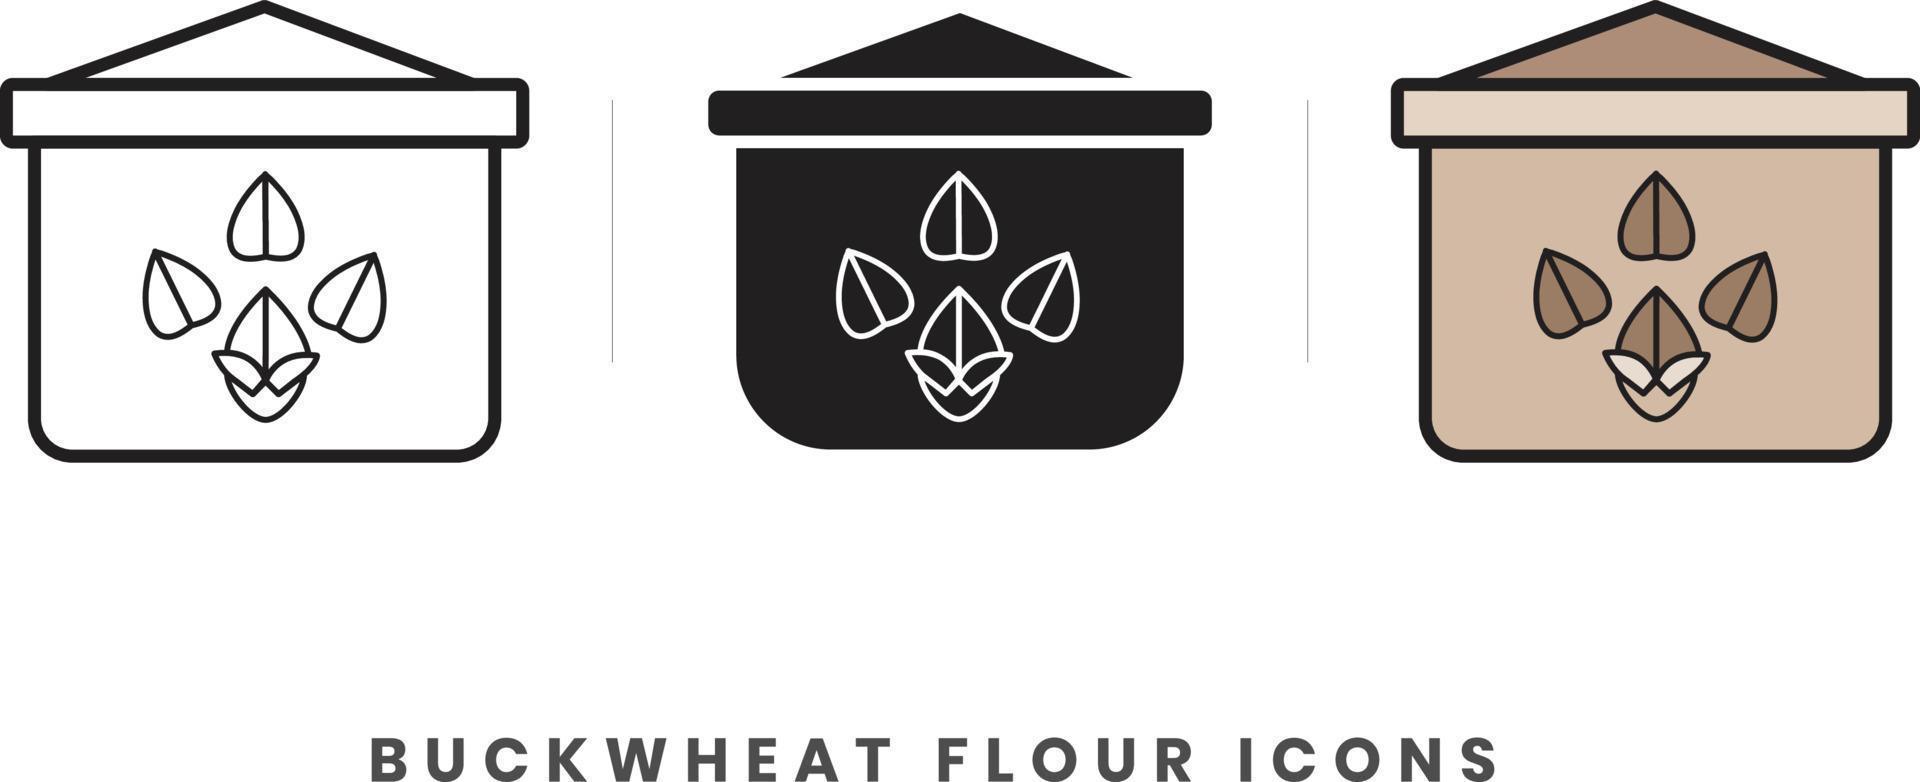 Buckwheat flour icon. In lineart, outline, solid, colored styles. For wesite design, mobile app, software vector